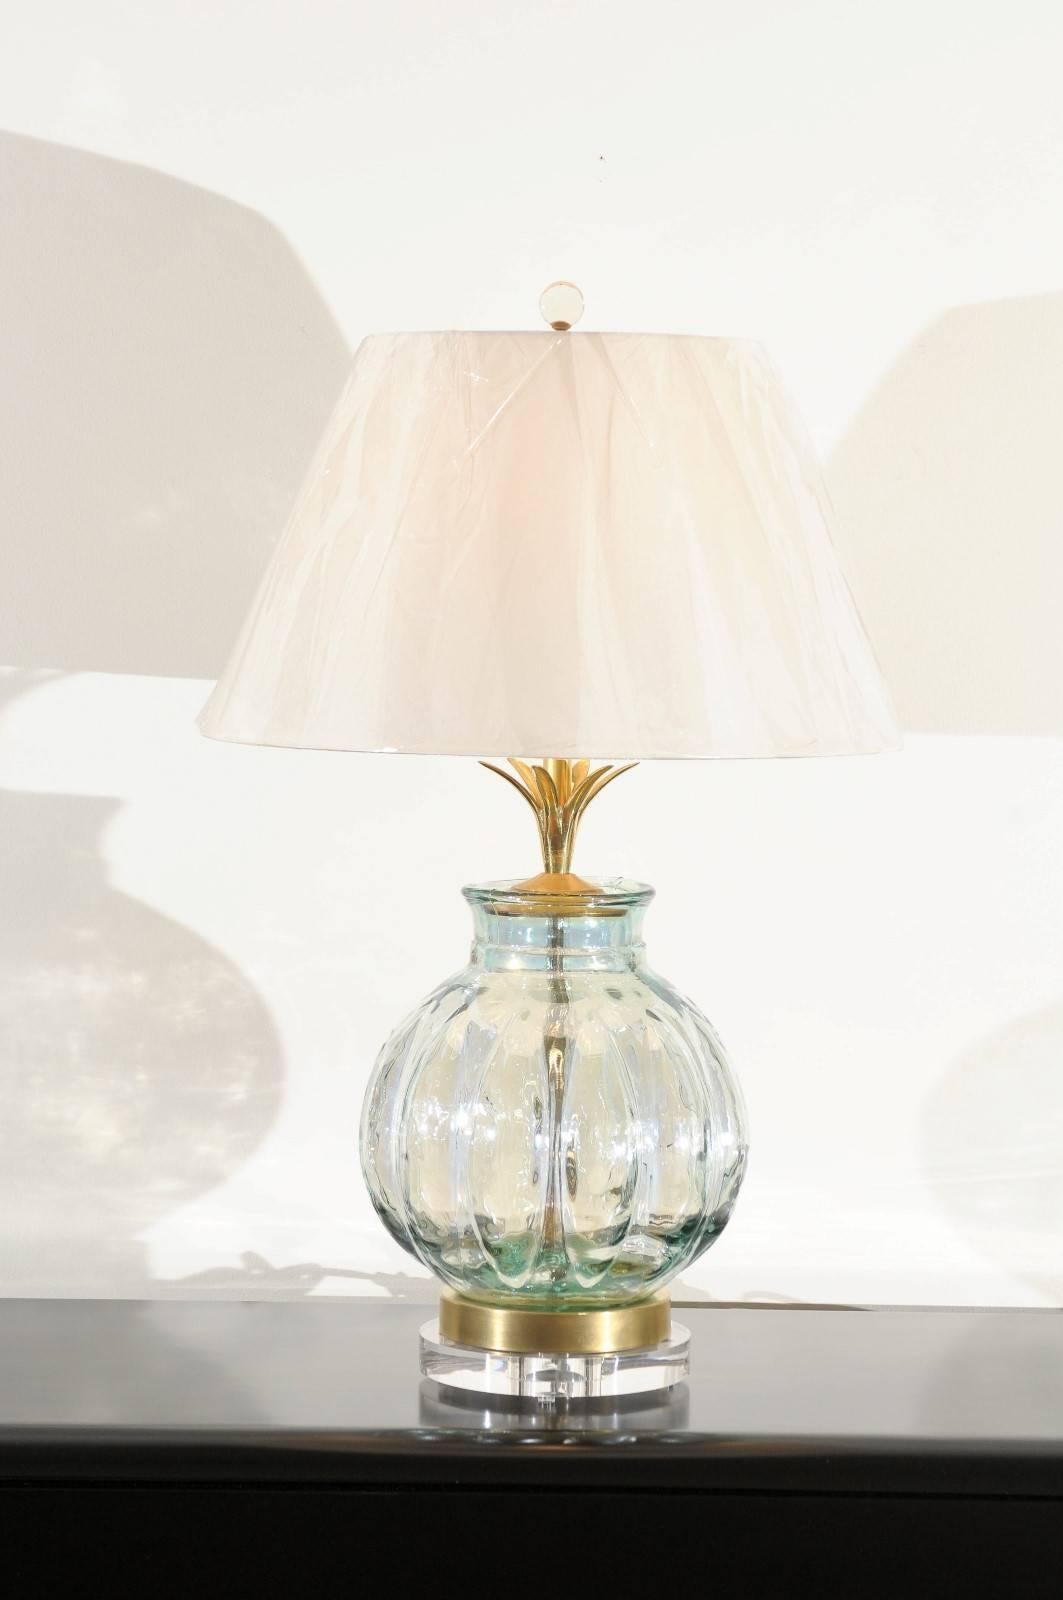 An exceptional pair of blown glass vessels as custom lamps. Thick and heavy fluted form with a subtle reflective quality. Beautiful solid brass petal neck detail and two-step base comprised of new museum quality Lucite and brass. Exquisite jewelry!